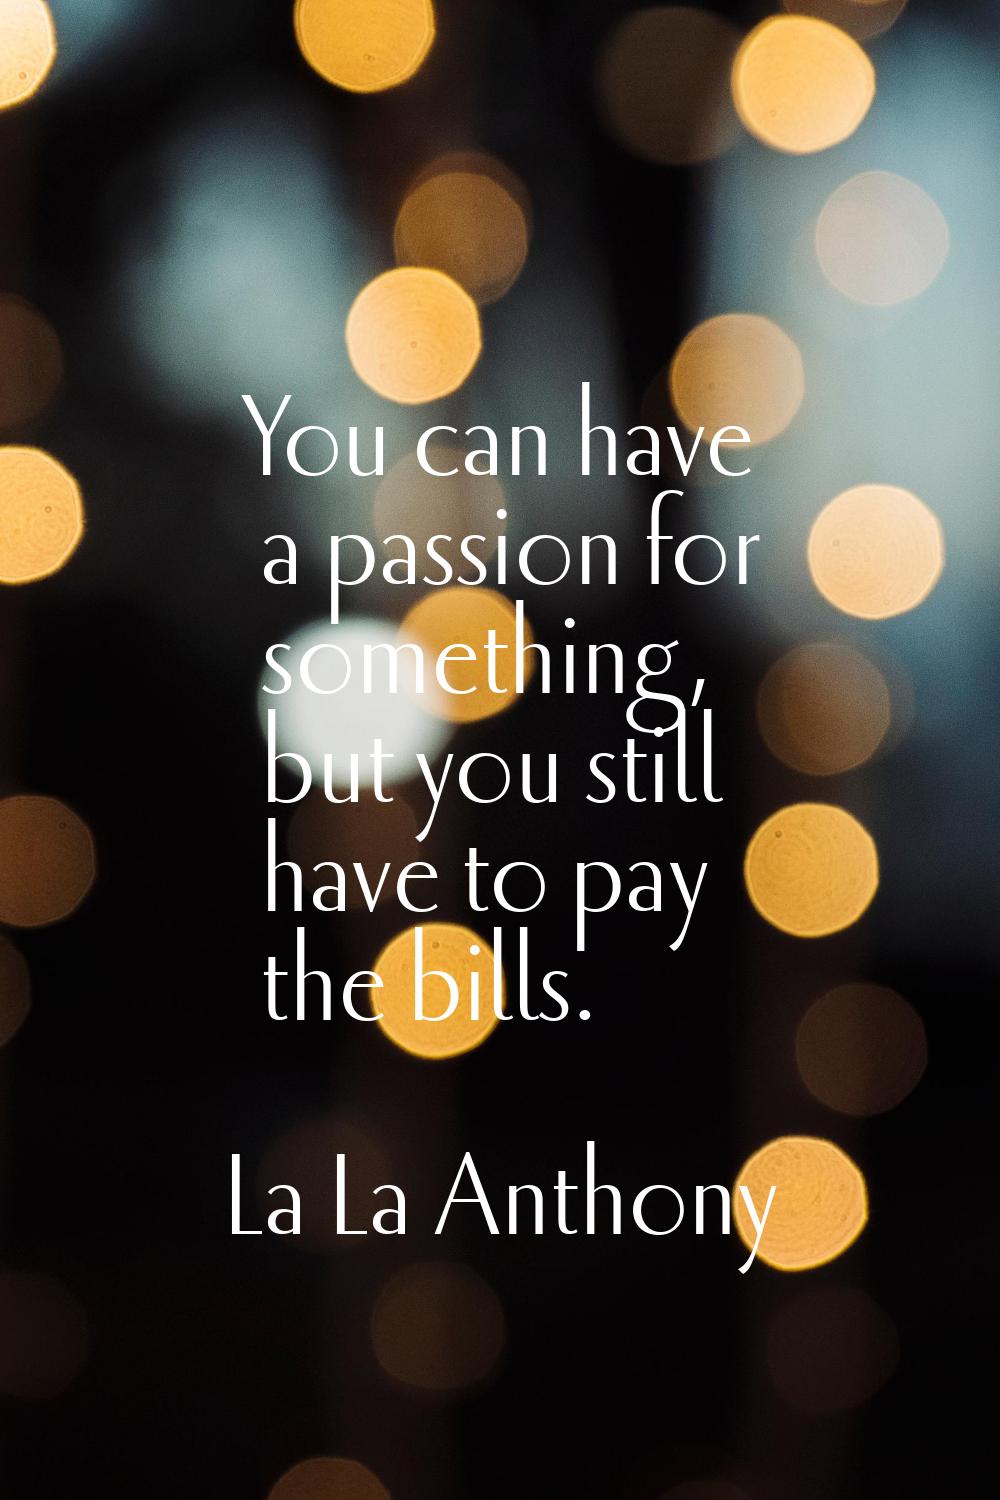 You can have a passion for something, but you still have to pay the bills.